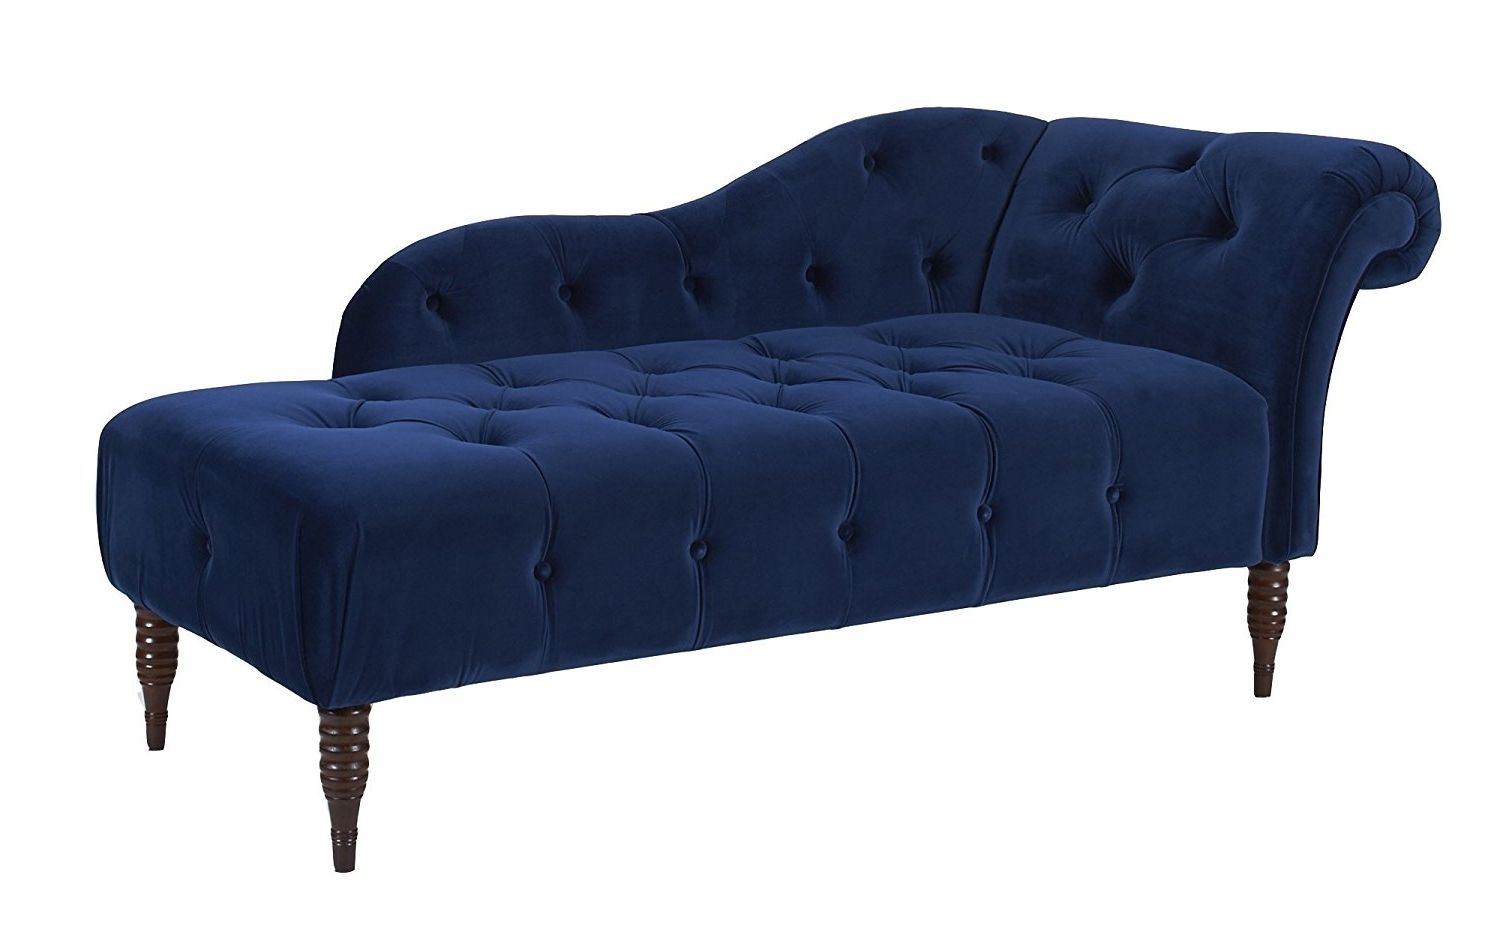 Newest Amazon: Jennifer Taylor Home, Chaise Lounge, Right Arm Facing Intended For Blue Chaise Lounges (View 9 of 15)